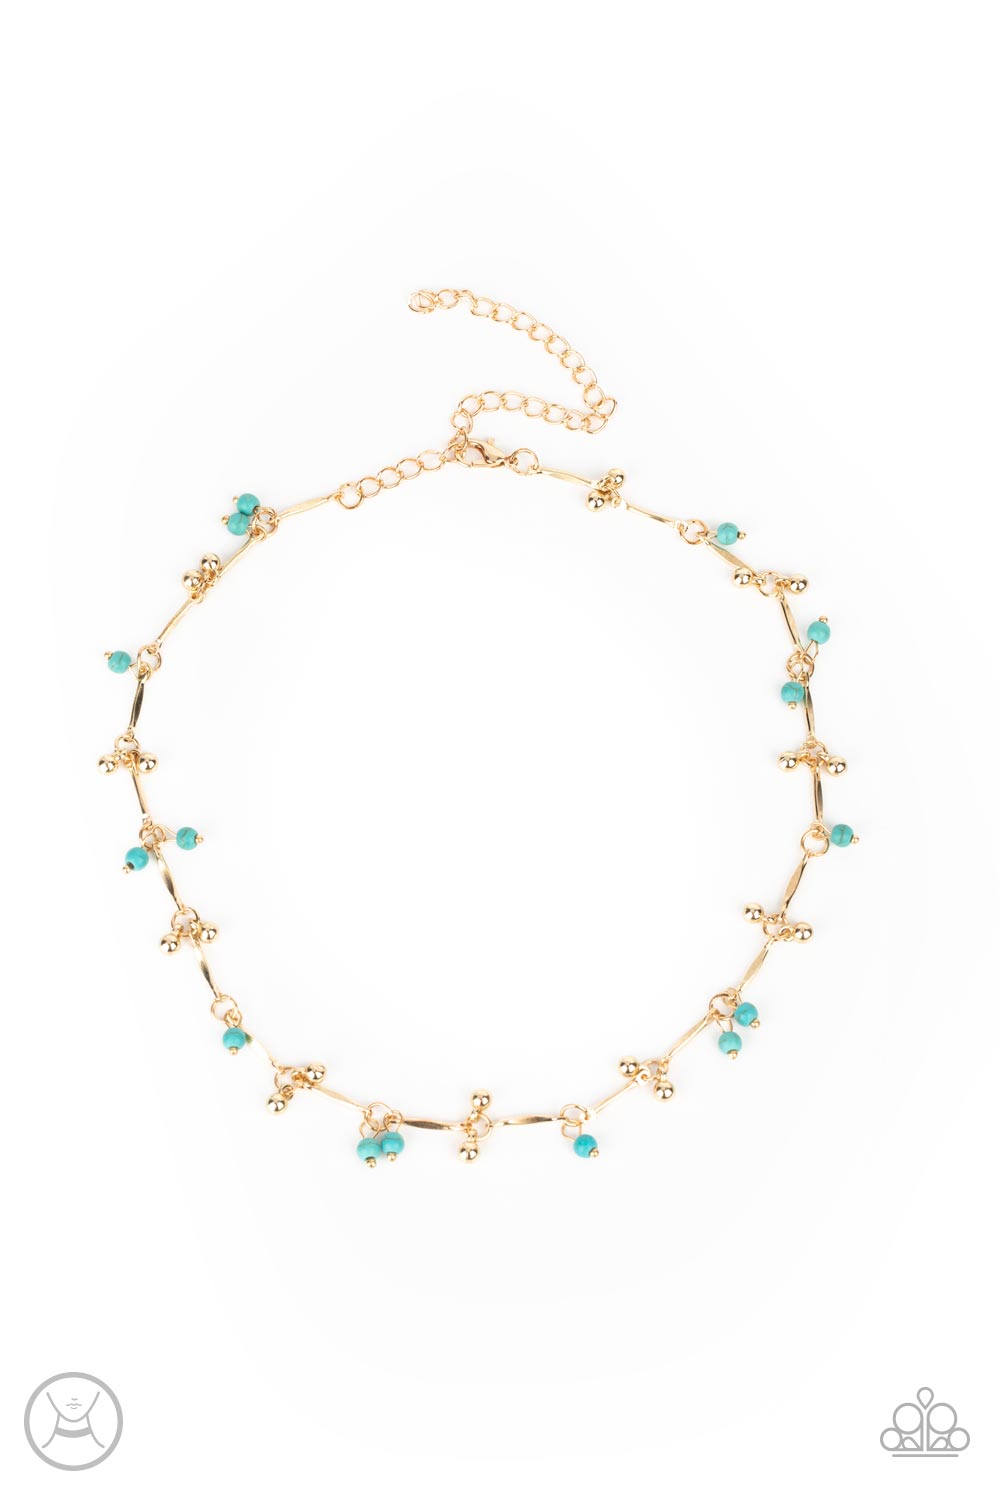 Sahara Social Gold Choker Necklace - Paparazzi Accessories  Pairs of dainty gold beads and turquoise stone beads dangle between faceted gold bars that interconnect around the neck, creating an earthy fringe. Features an adjustable clasp closure.  Sold as one individual choker necklace. Includes one pair of matching earrings.